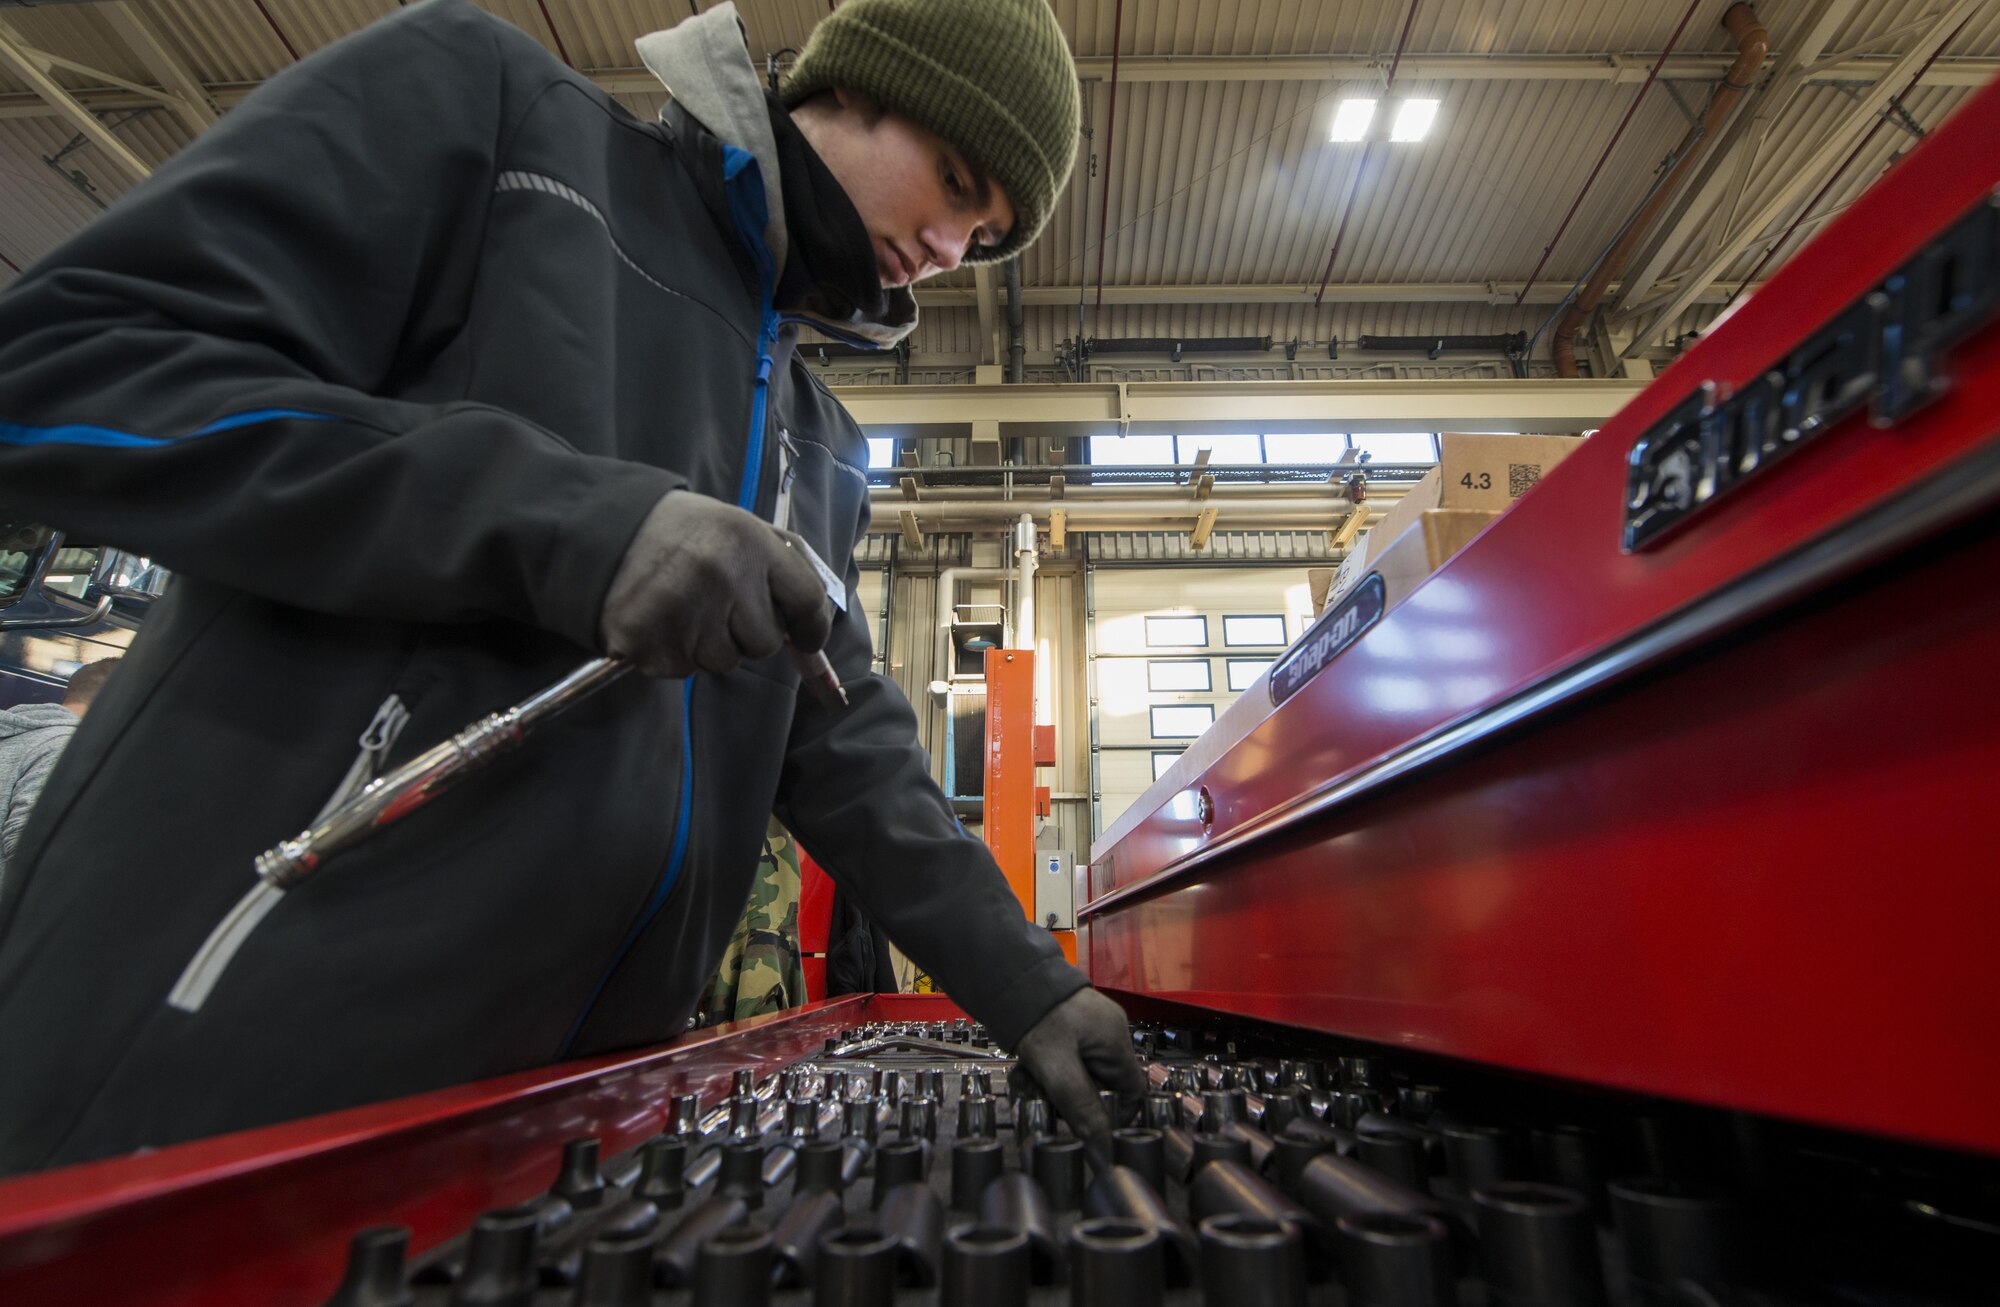 Hendrik Ecker, 86th Vehicle Readiness Squadron vehicle mechanic technician, selects a tool at Ramstein Air Base, Germany, Nov. 14, 2016. Ecker was interested in vehicle maintenance at age fourteen and was able to partner with the 86th VRS to gain the skills and knowledge of the craft through Ramstein’s Local National Apprenticeship program. He is specializing in large vehicle maintenance. (U.S. Air Force photo by Senior Airman Tryphena Mayhugh)